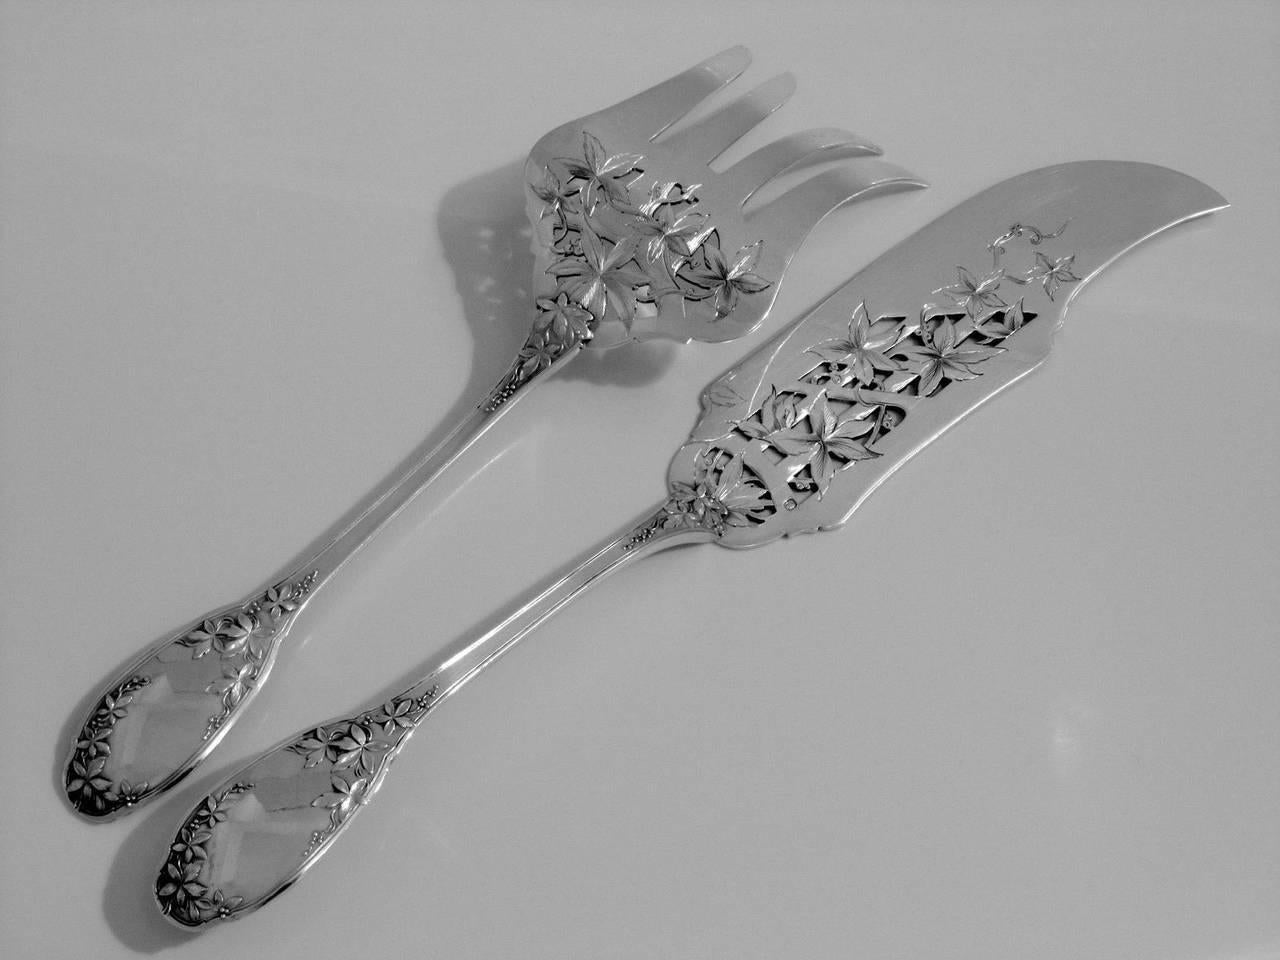 Fabulous French All Sterling Silver Fish Servers Two Pieces Vine Leaves Pattern 2